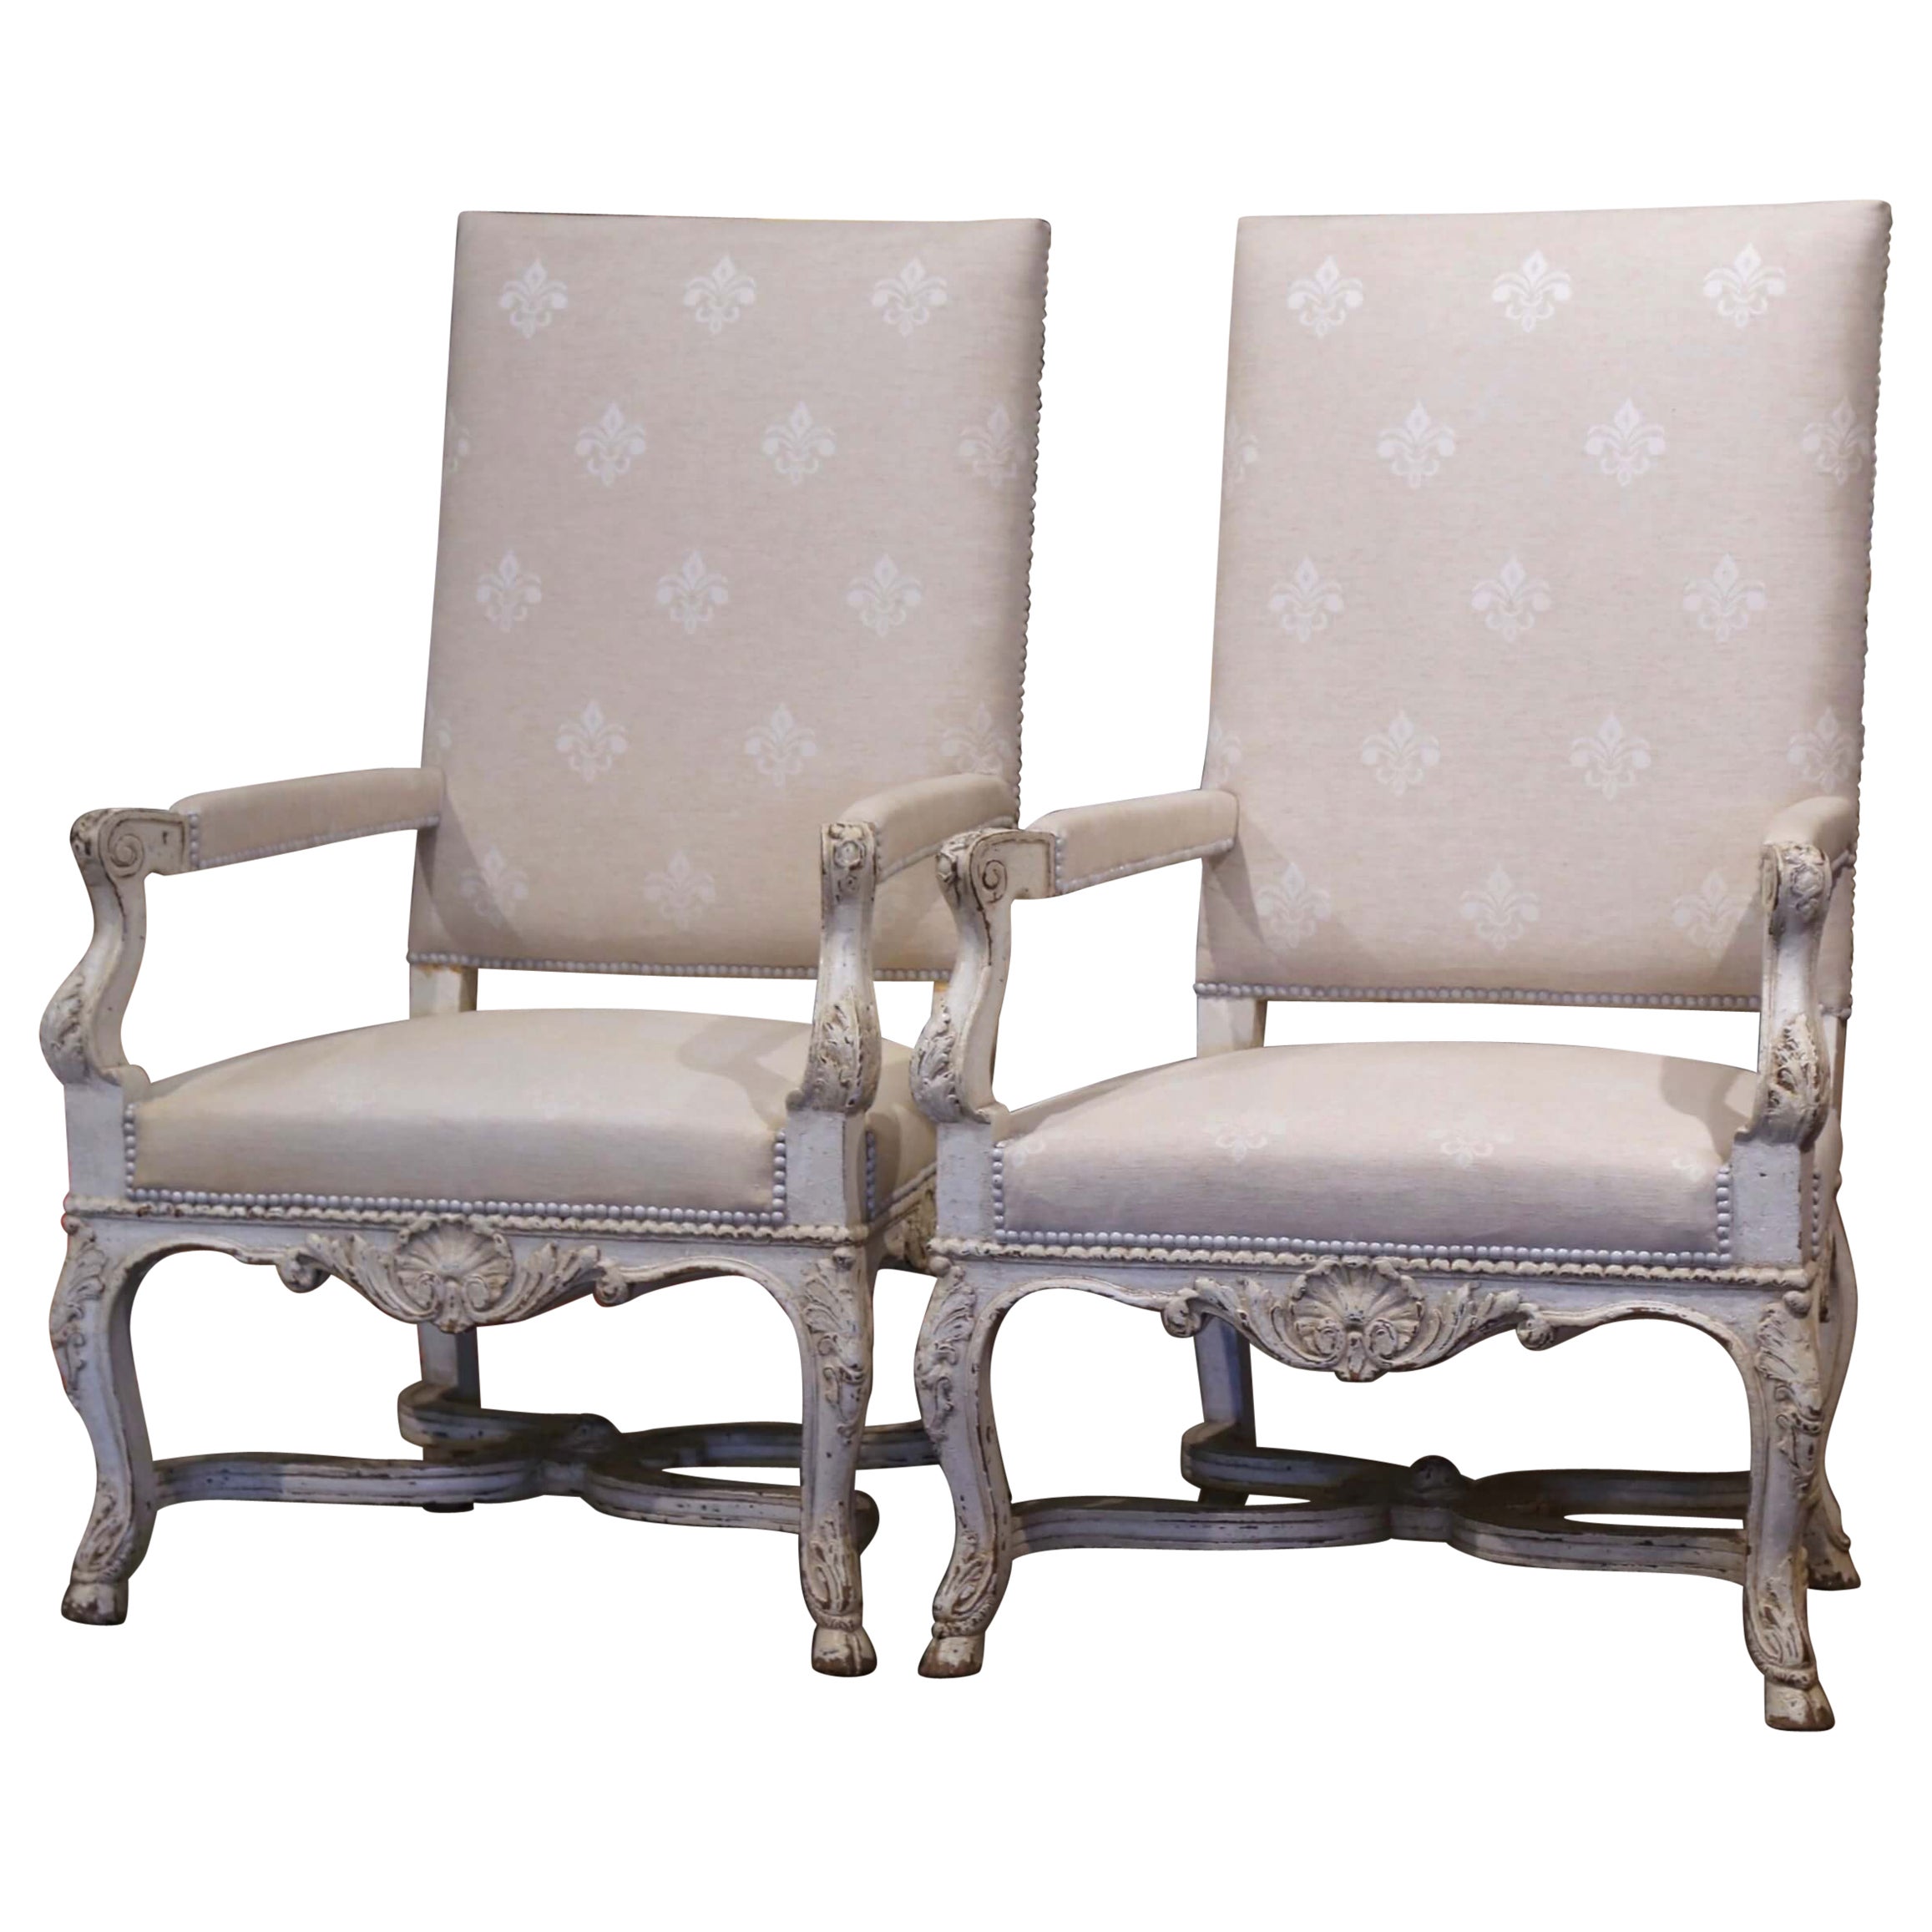 Pair of 19th Century Louis XIV Carved Painted Armchairs with Fleur-de-Lys Fabric